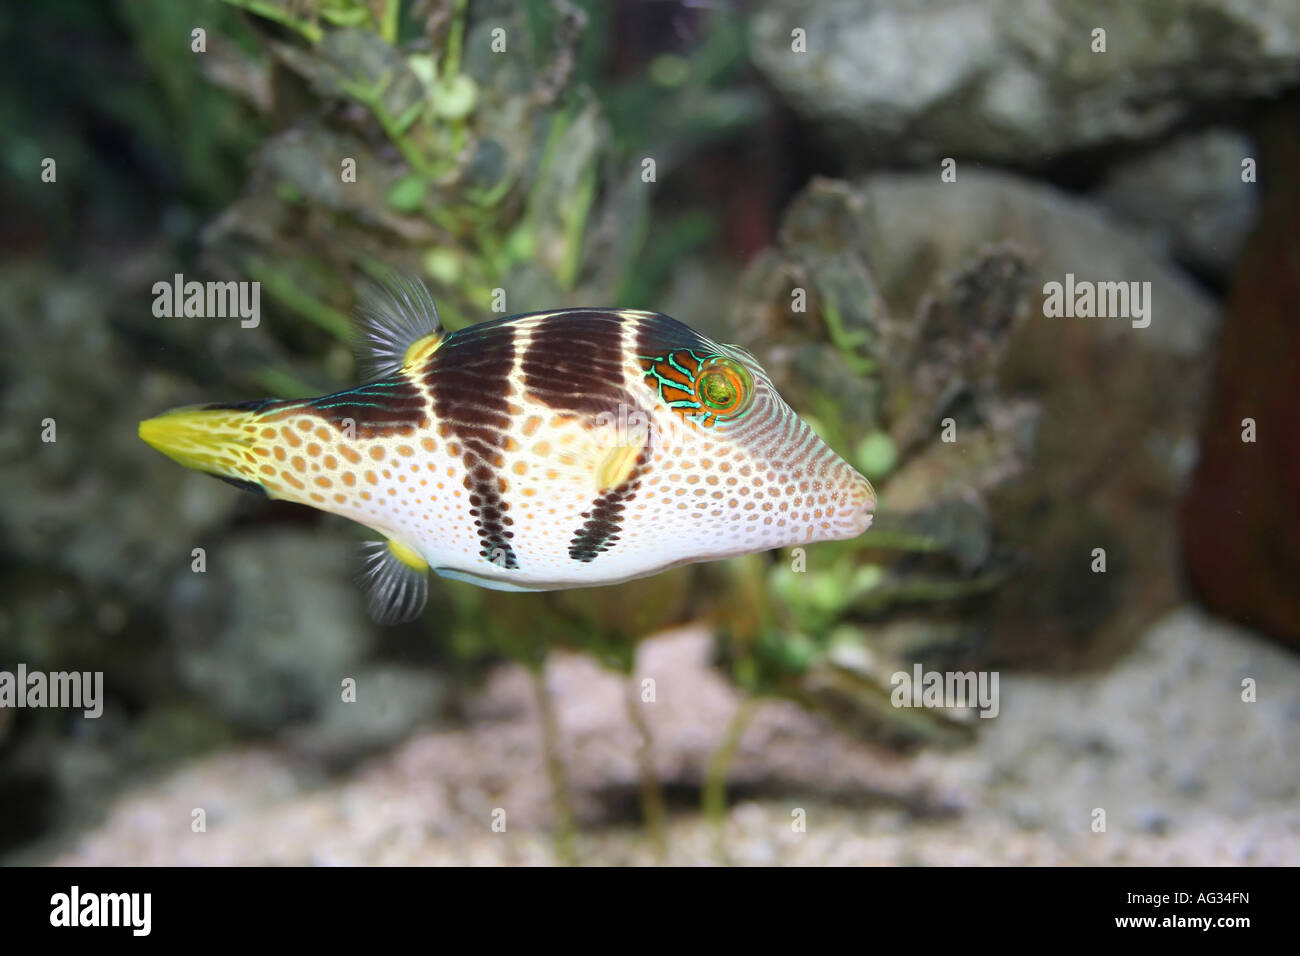 Tropical Fish from the Oceans. Canthigaster solandri Stock Photo